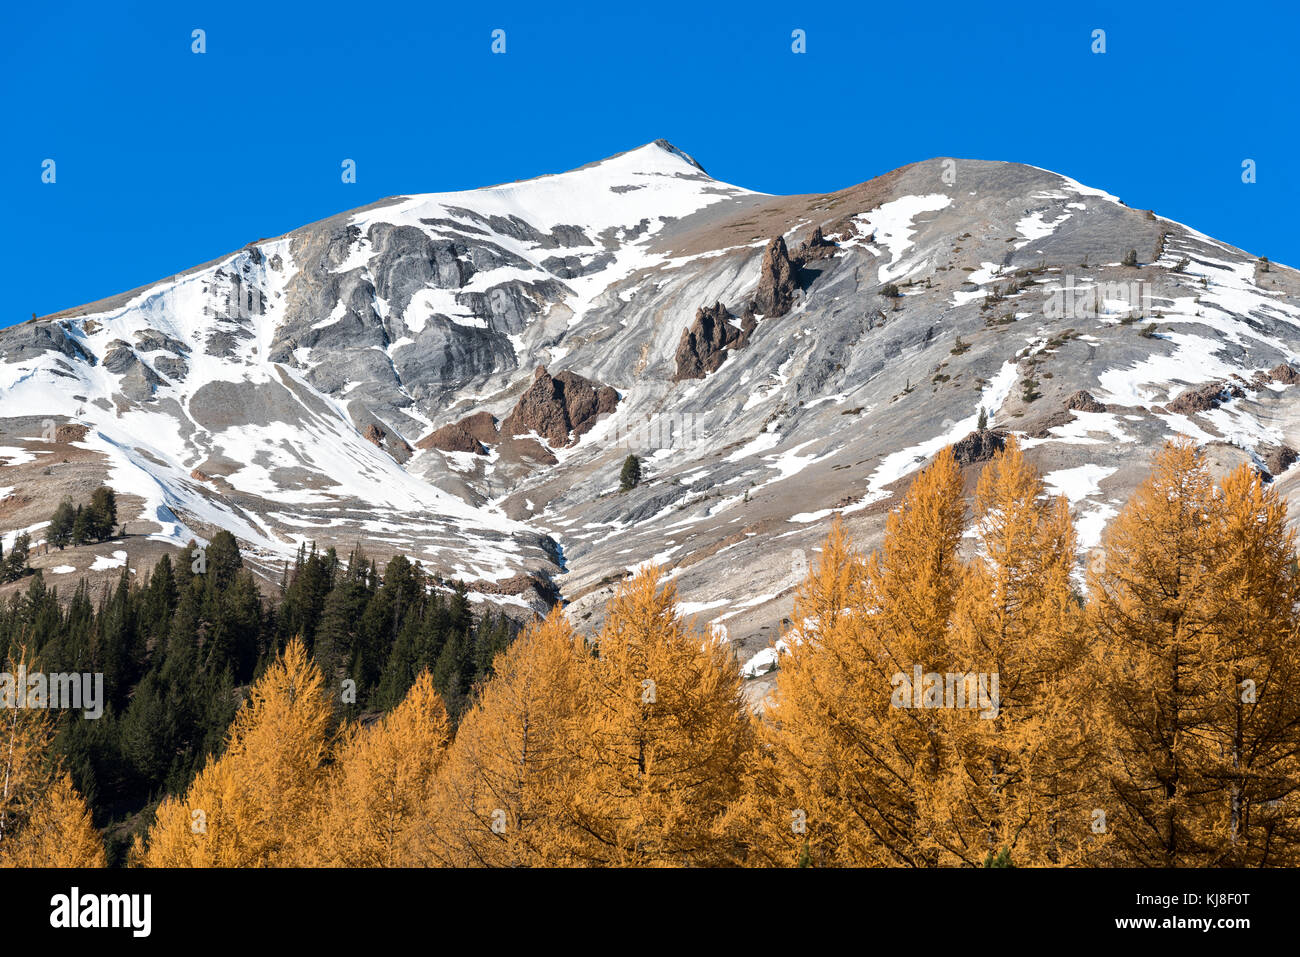 Western larch trees and Cusick Mountain in Oregon's Wallowa Mountains. Stock Photo